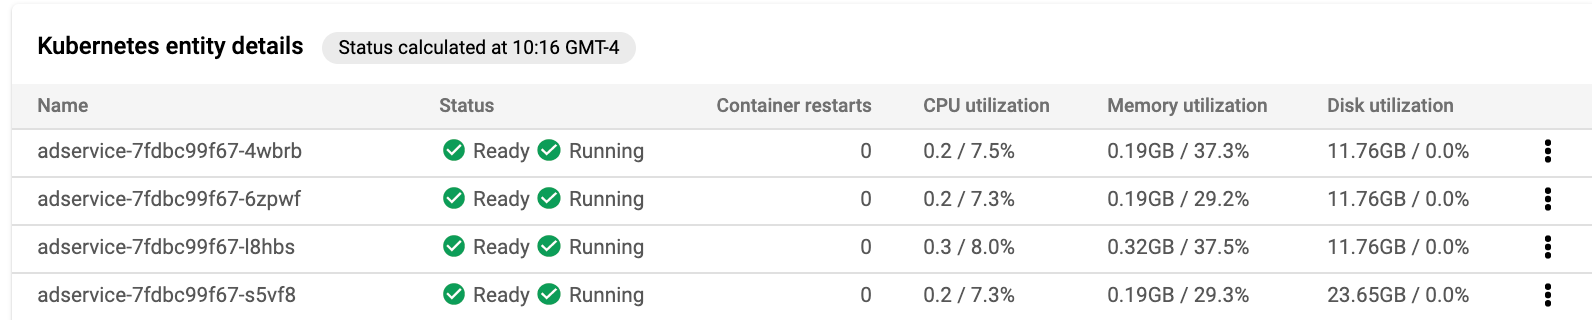 **Kubernetes entity details** shows information about the entities in the service.